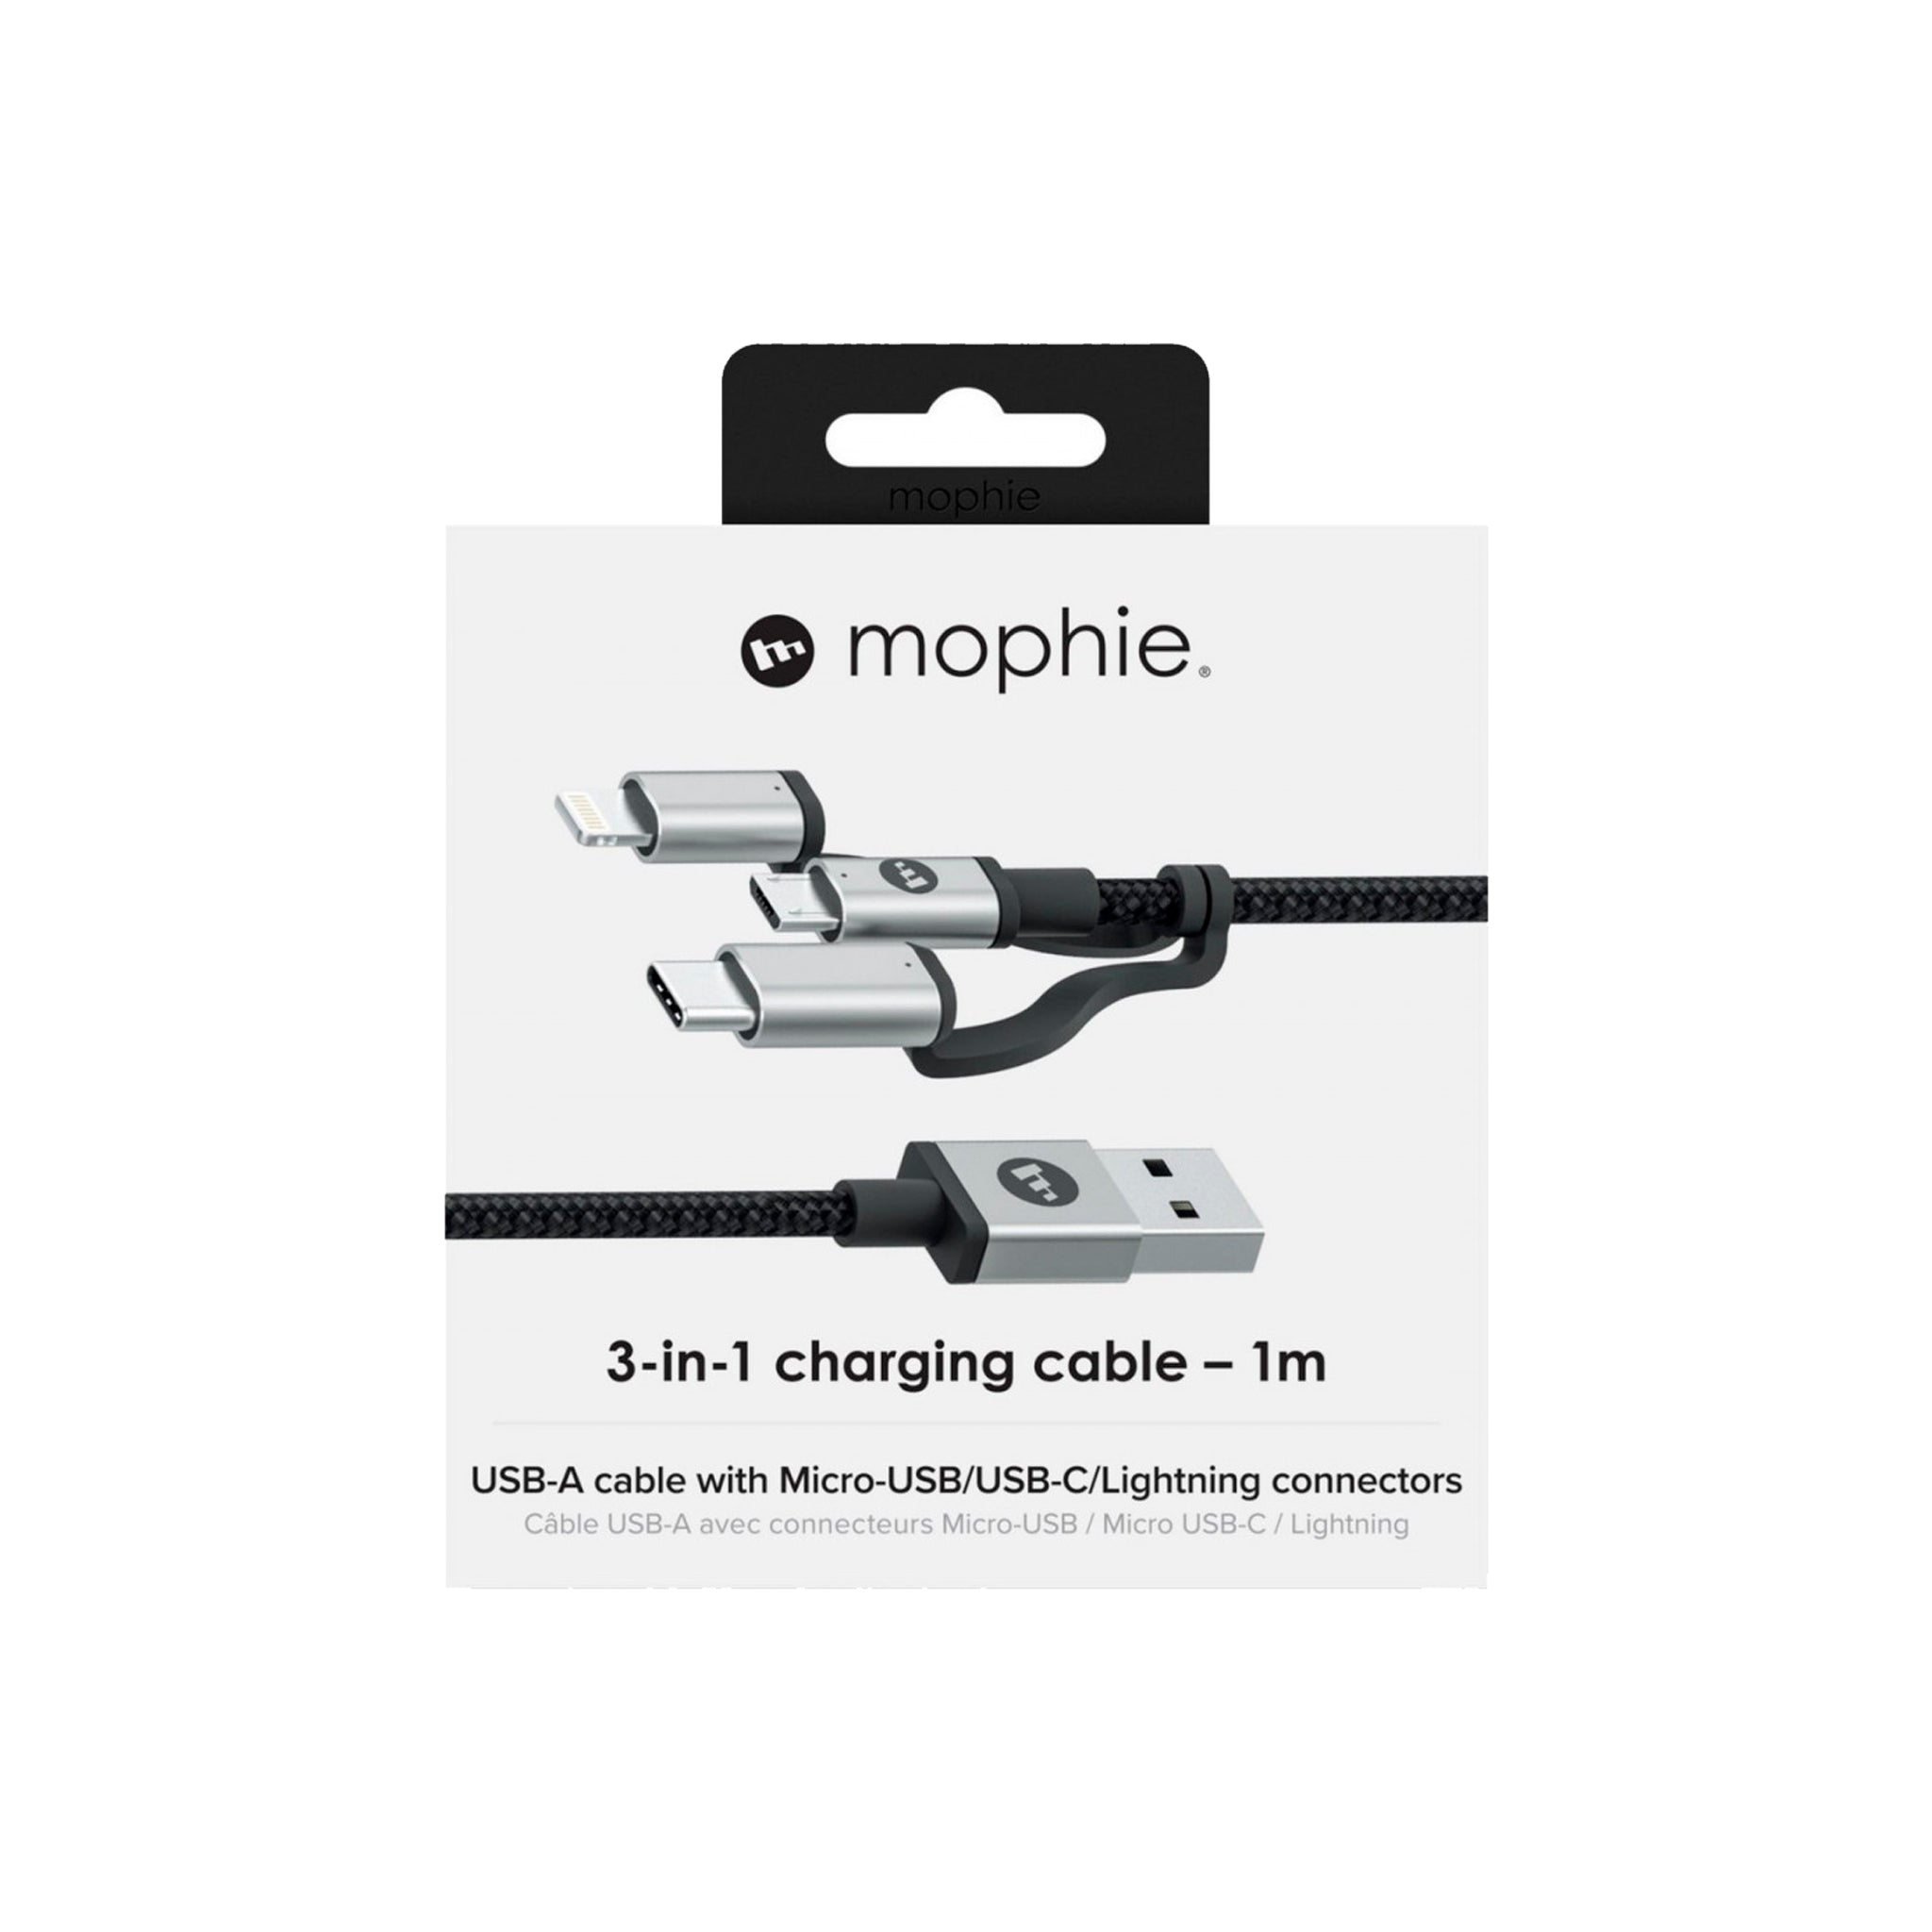 Mophie - Tri Tip Cable 3ft - Black